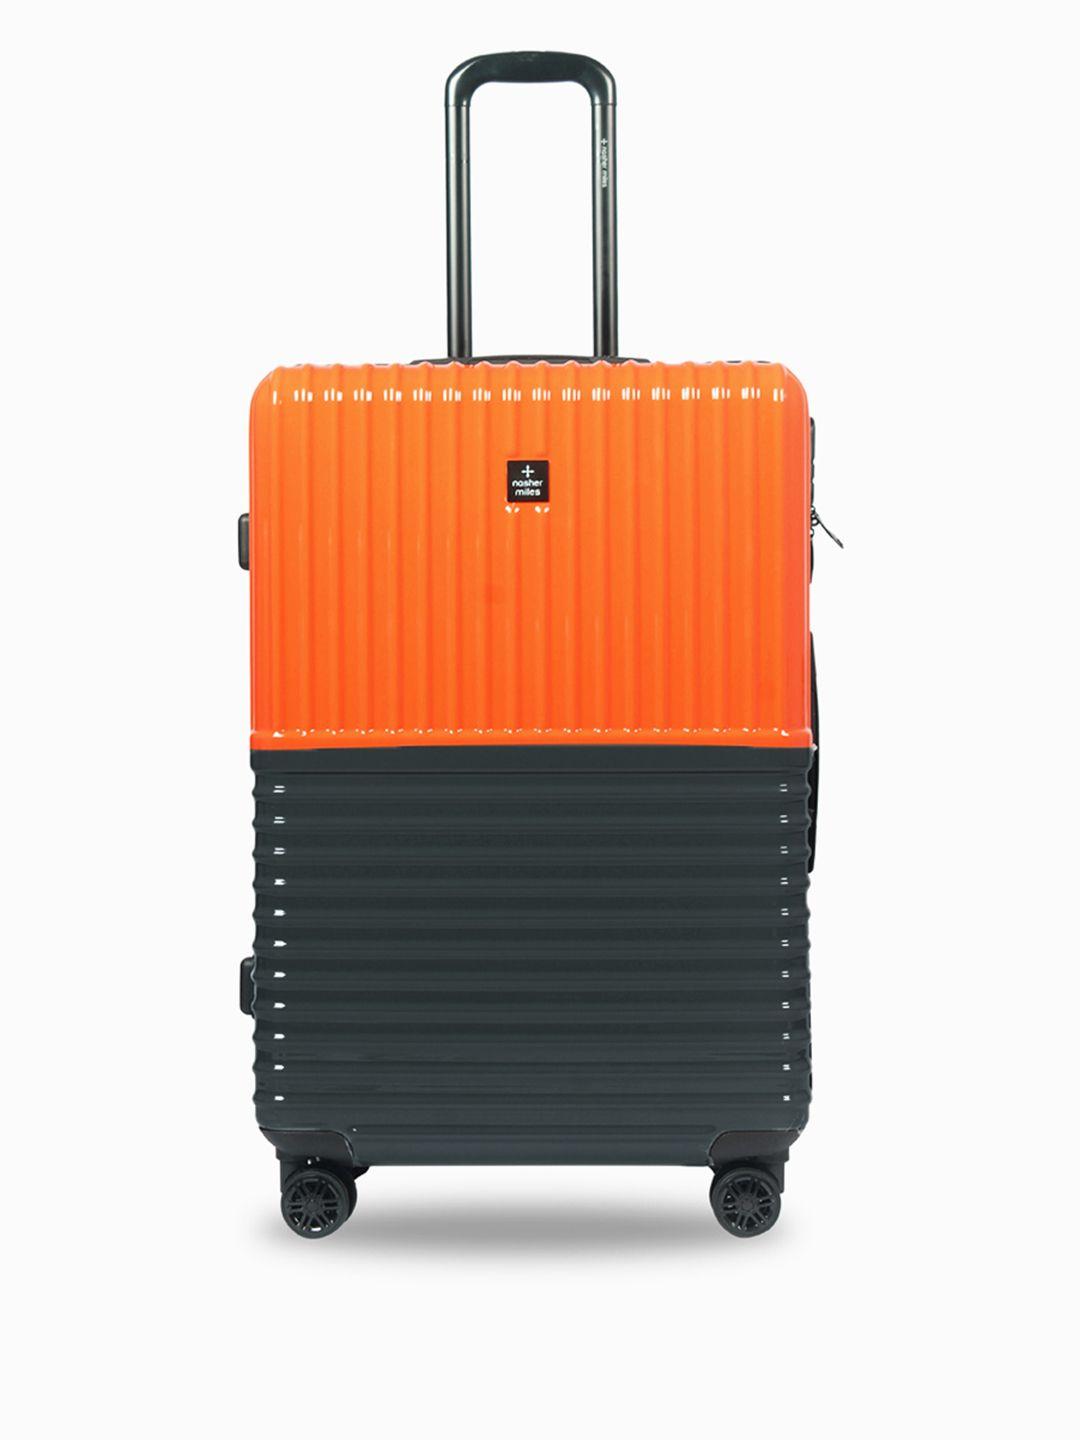 Nasher Miles Textured Hard-Sided Cabin Trolley Suitcase